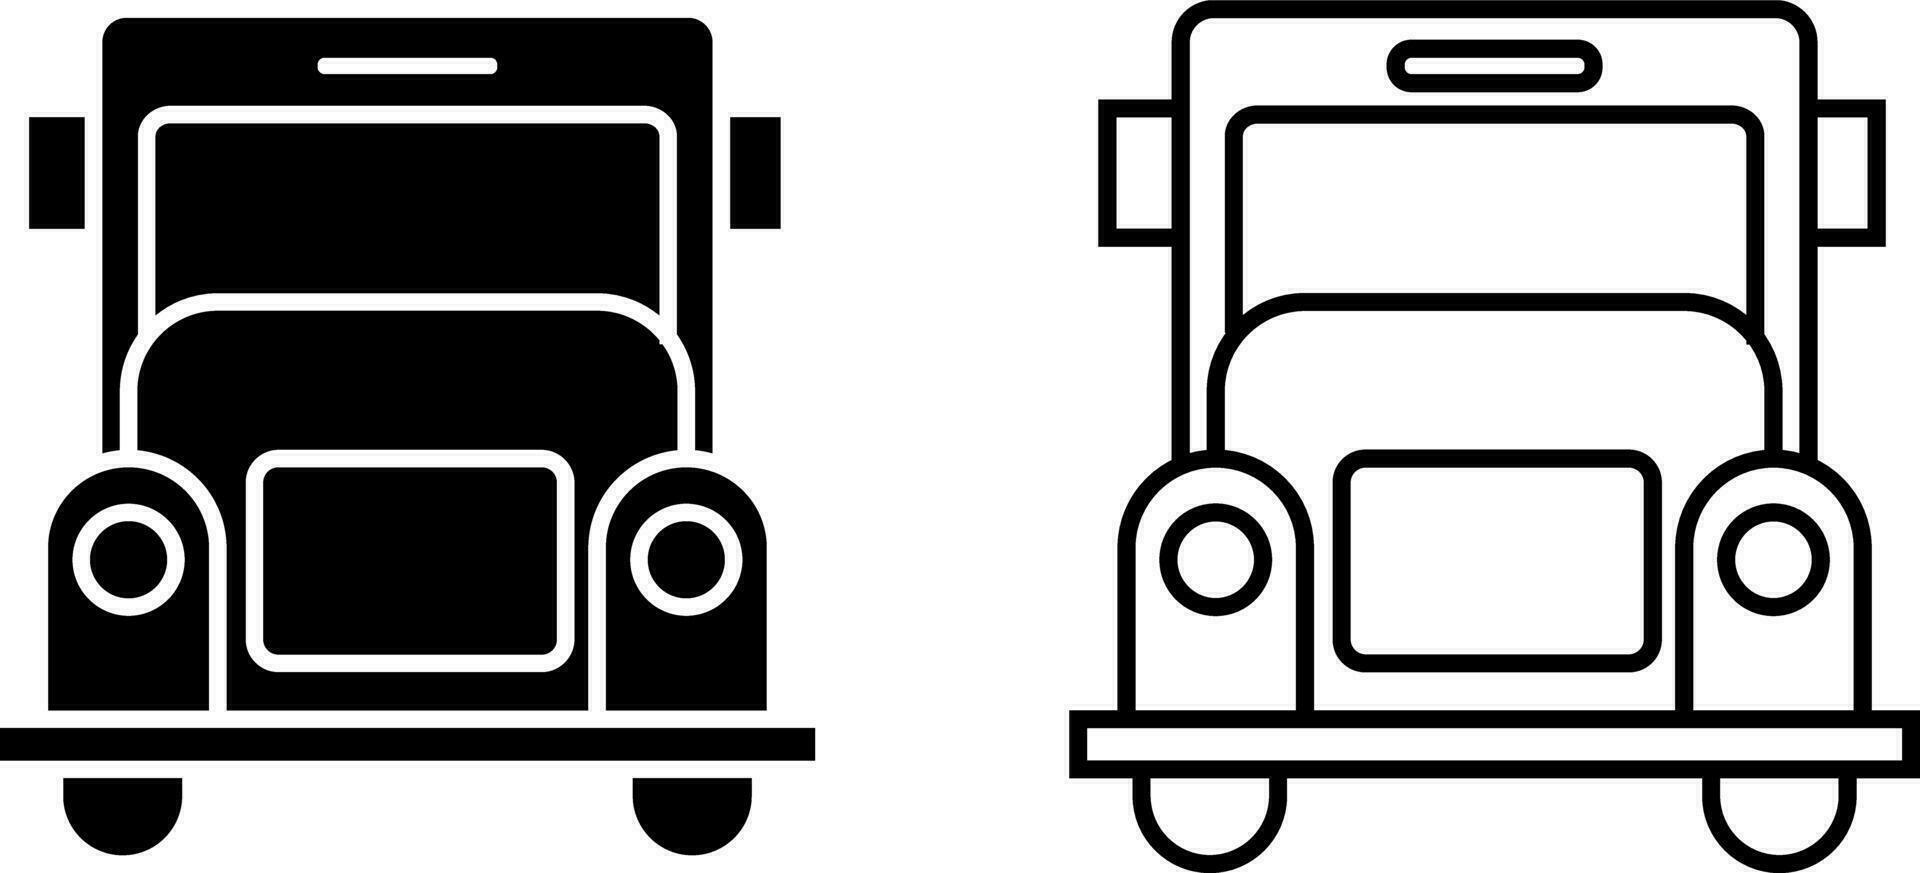 school bus icon in glyph and line style. Vector illustration